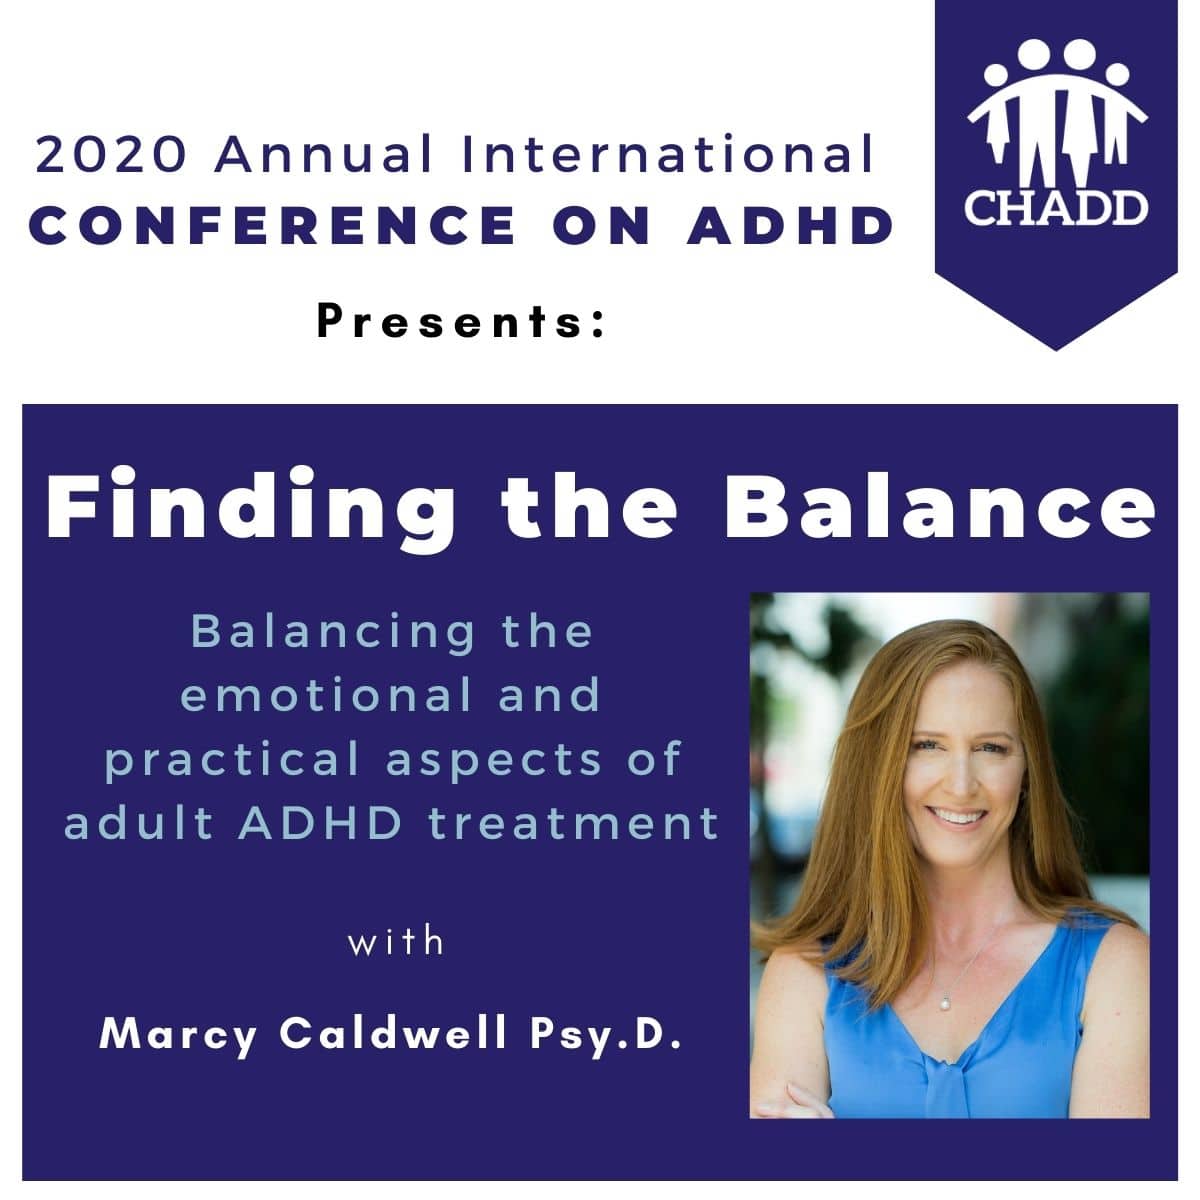 2020 Annual Conference on ADHD: Finding the Balance